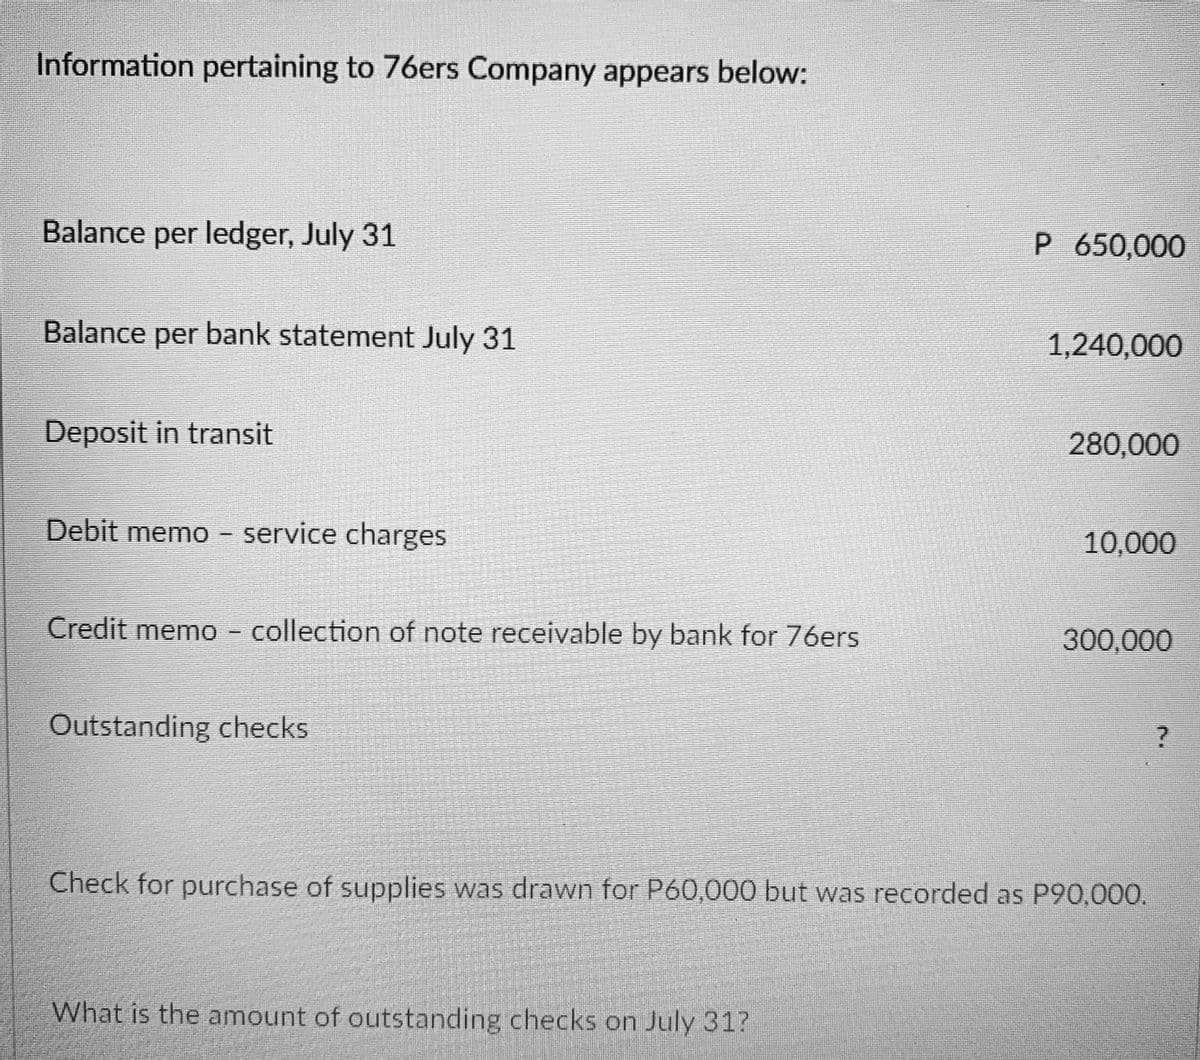 Information pertaining to 76ers Company appears below:
Balance per ledger, July 31
P 650,000
Balance per bank statement July 31
1,240,000
Deposit in transit
280,000
Debit memo - service charges
10,000
Credit memo - collection of note receivable by bank for 76ers
300,000
Outstanding checks
Check for purchase of supplies was drawn for P60,000 but was recorded as P90,000.
What is the amount of outstanding checks on July 31?
